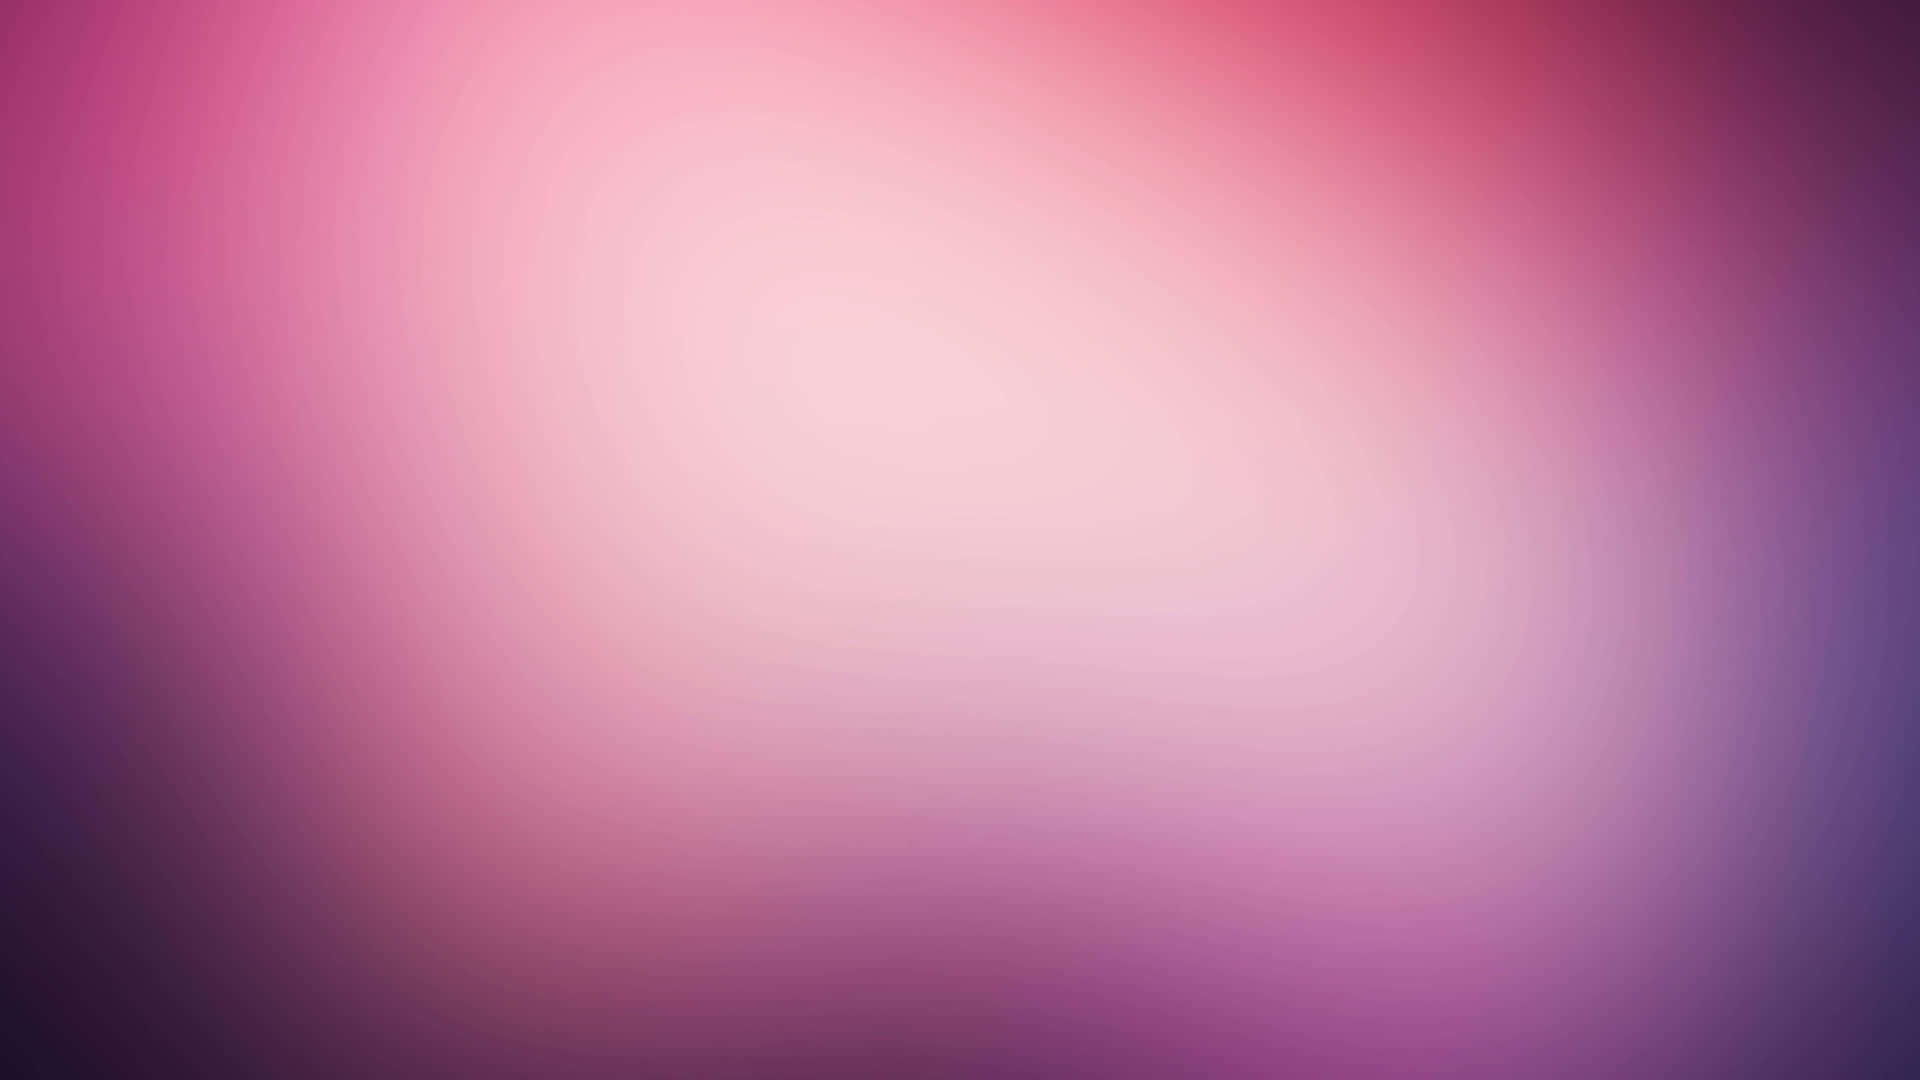 A simple pink background Wallpaper